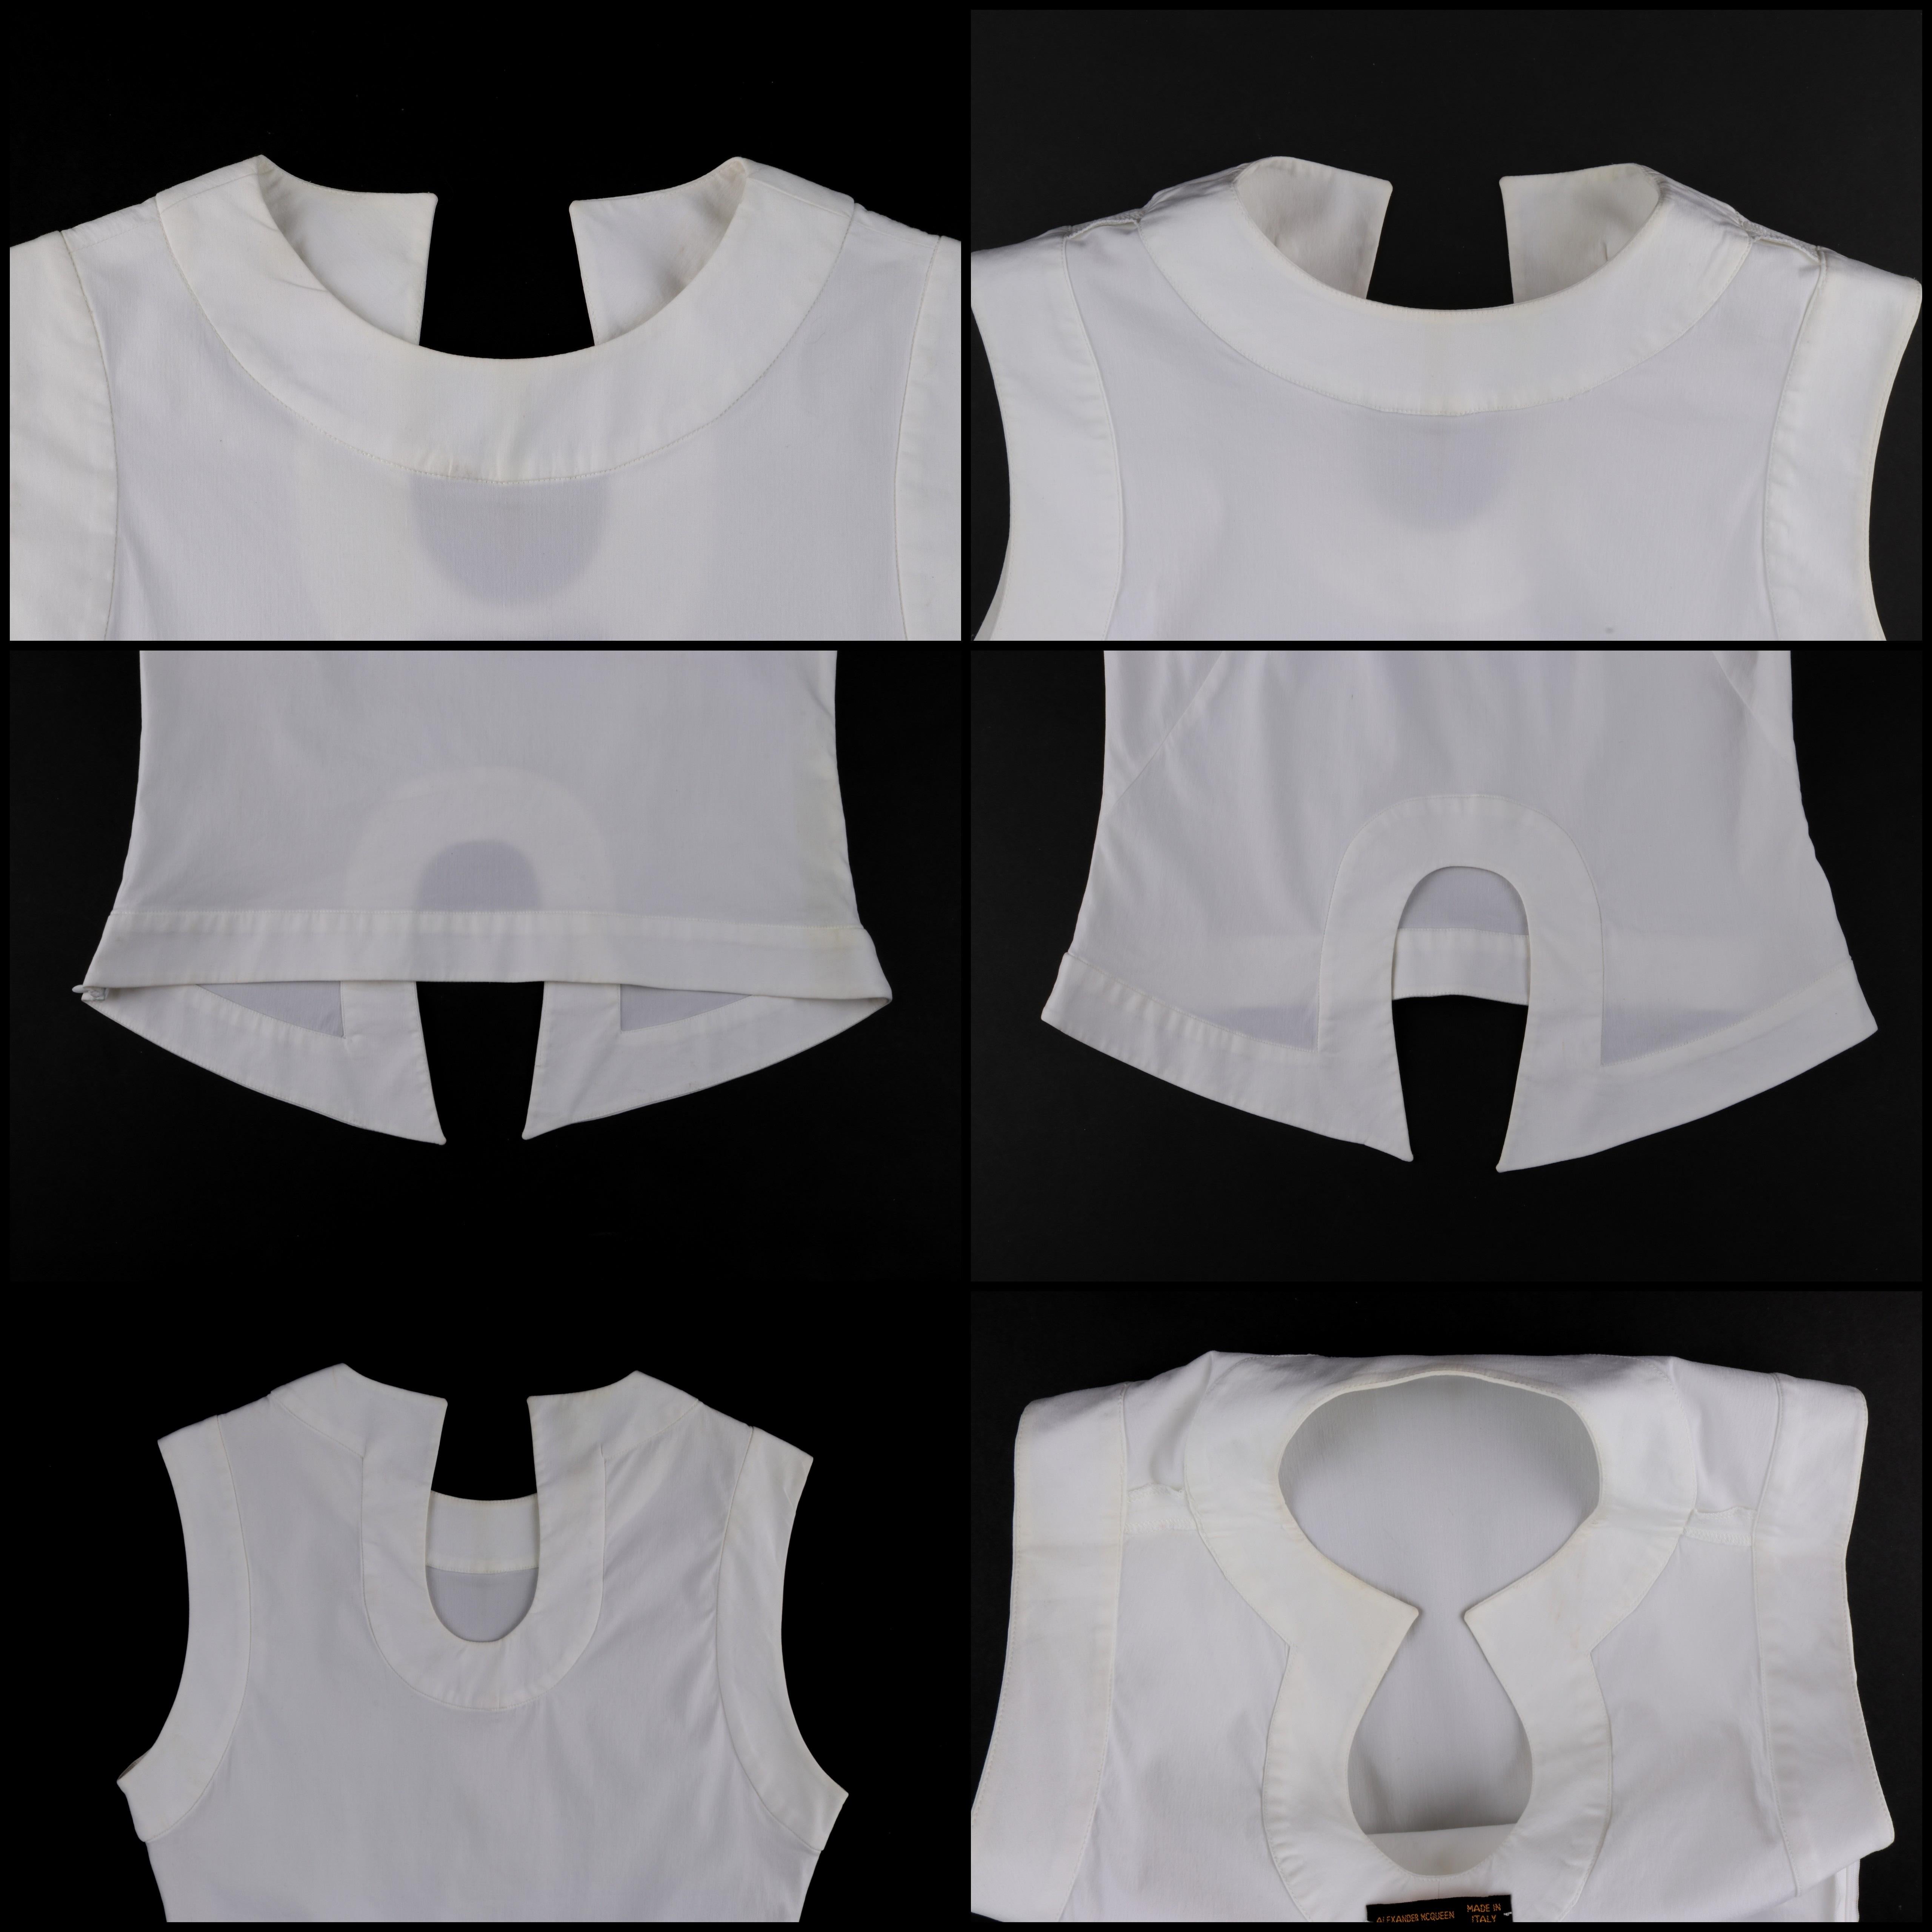 ALEXANDER McQUEEN S/S 2000 “Eye” Asymmetric Keyhole Cutout Sleeveless Top In Good Condition For Sale In Thiensville, WI